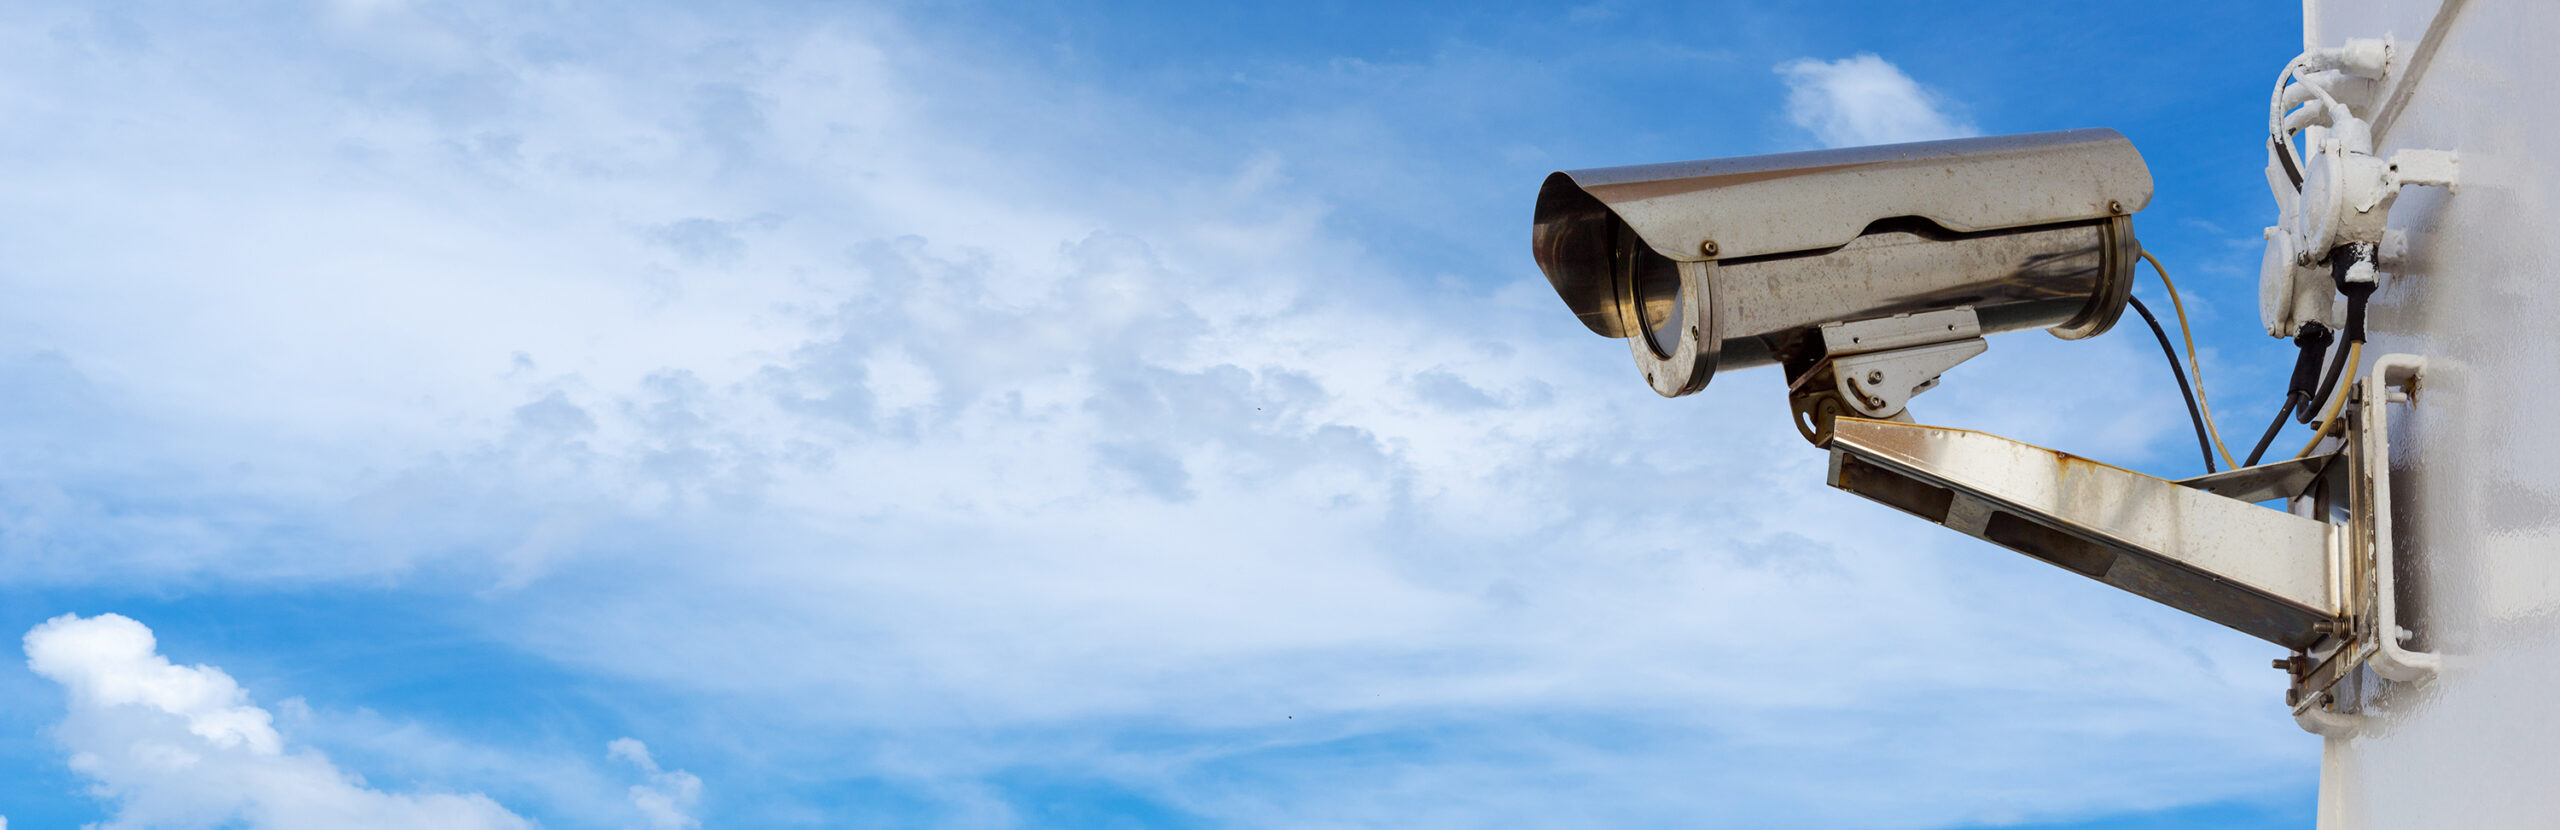 Video surveillance, a new asset for urban and mobility strategies